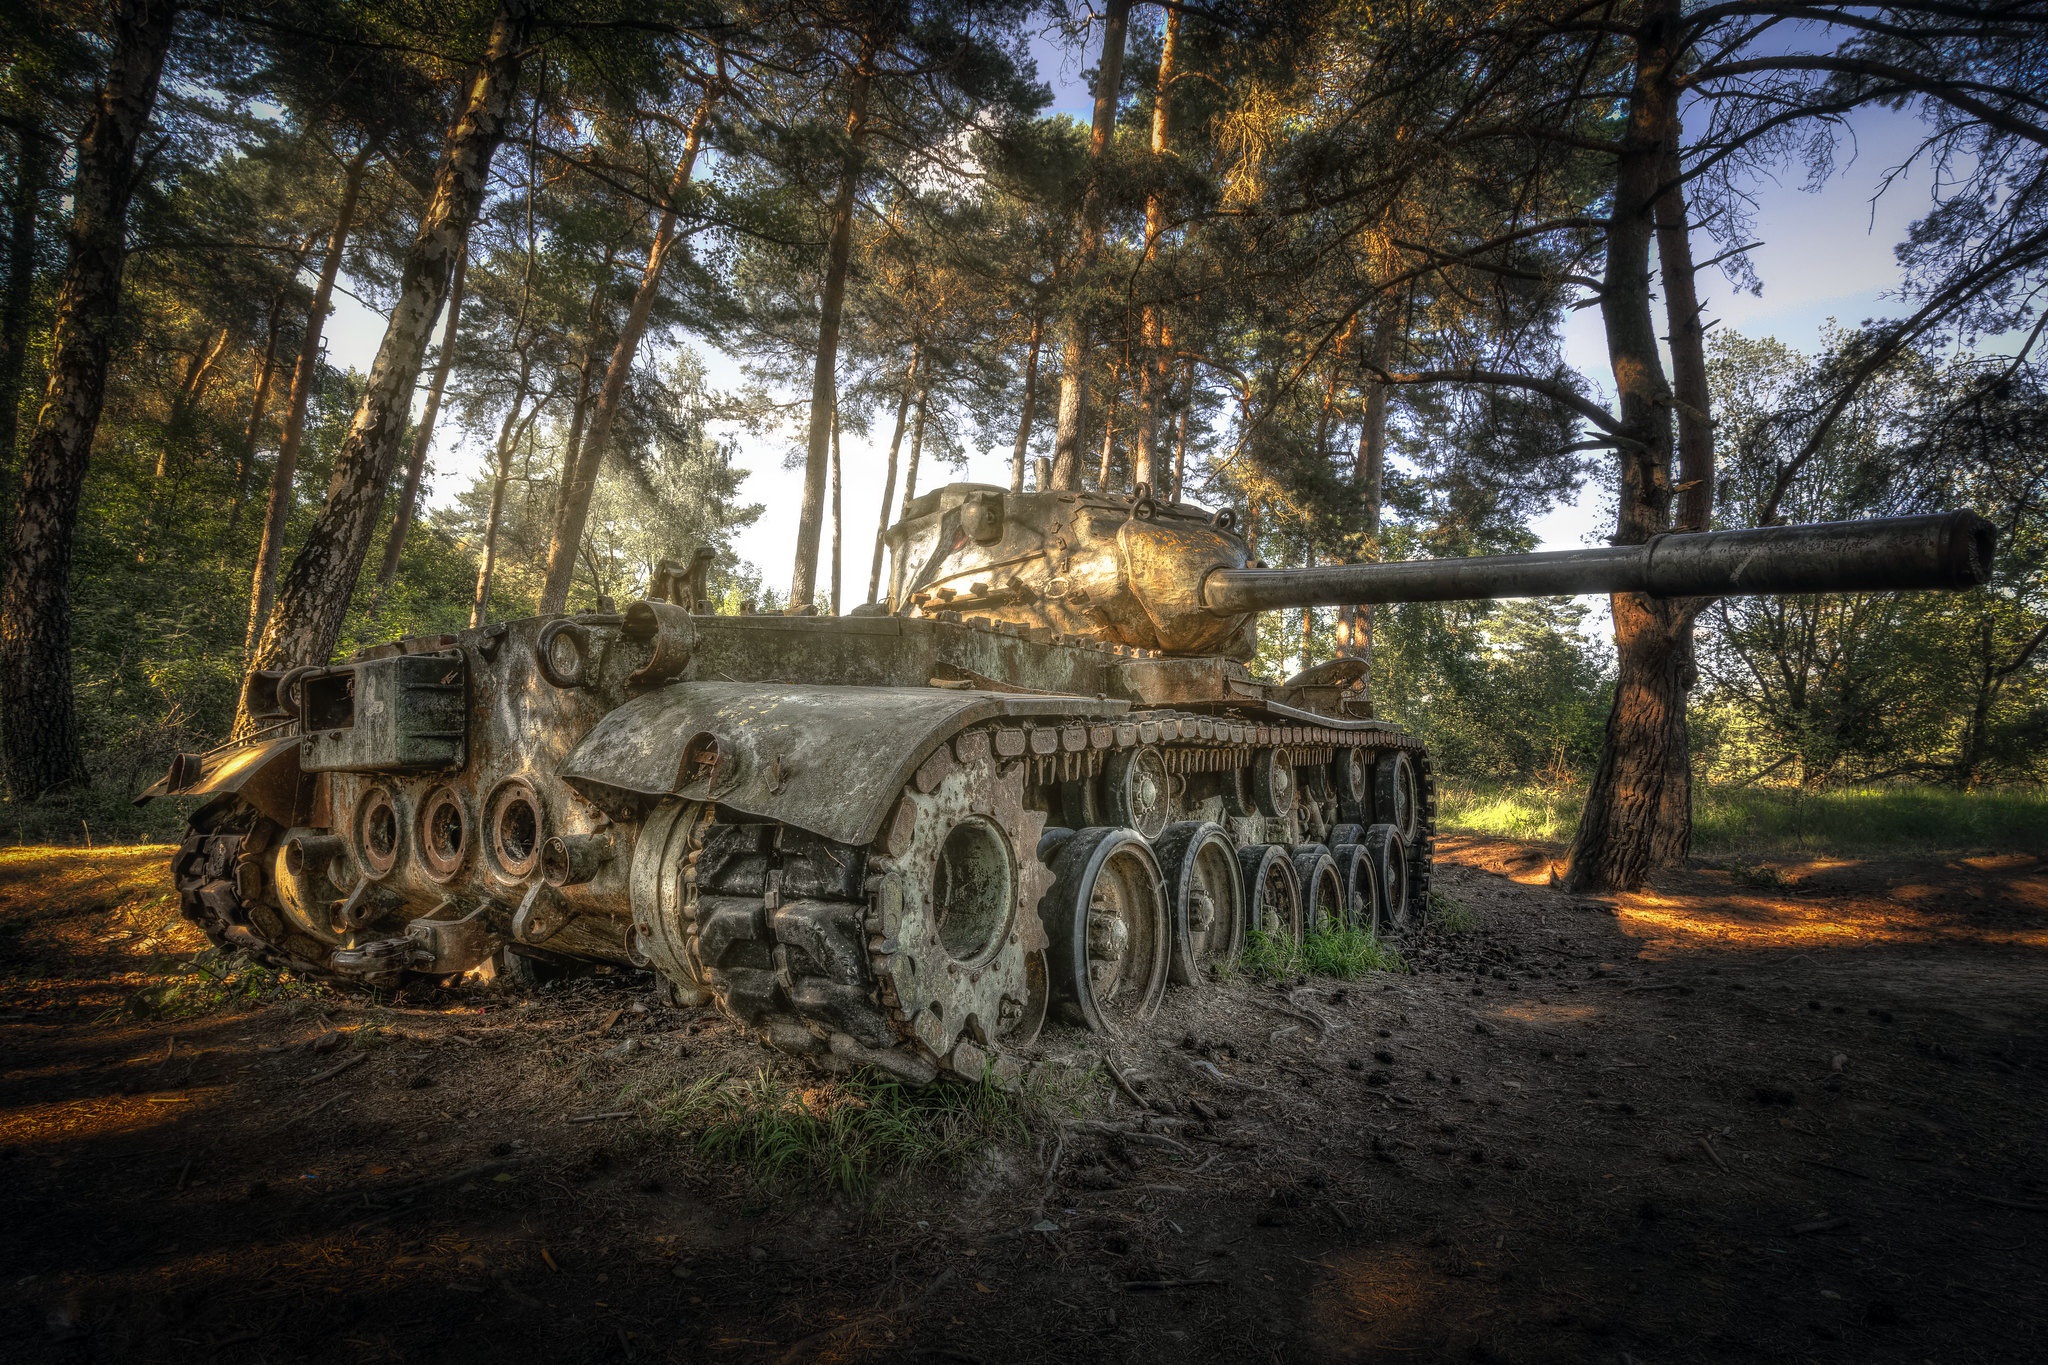 General 2048x1365 tank wreck vehicle trees outdoors military M47 Patton overgrown